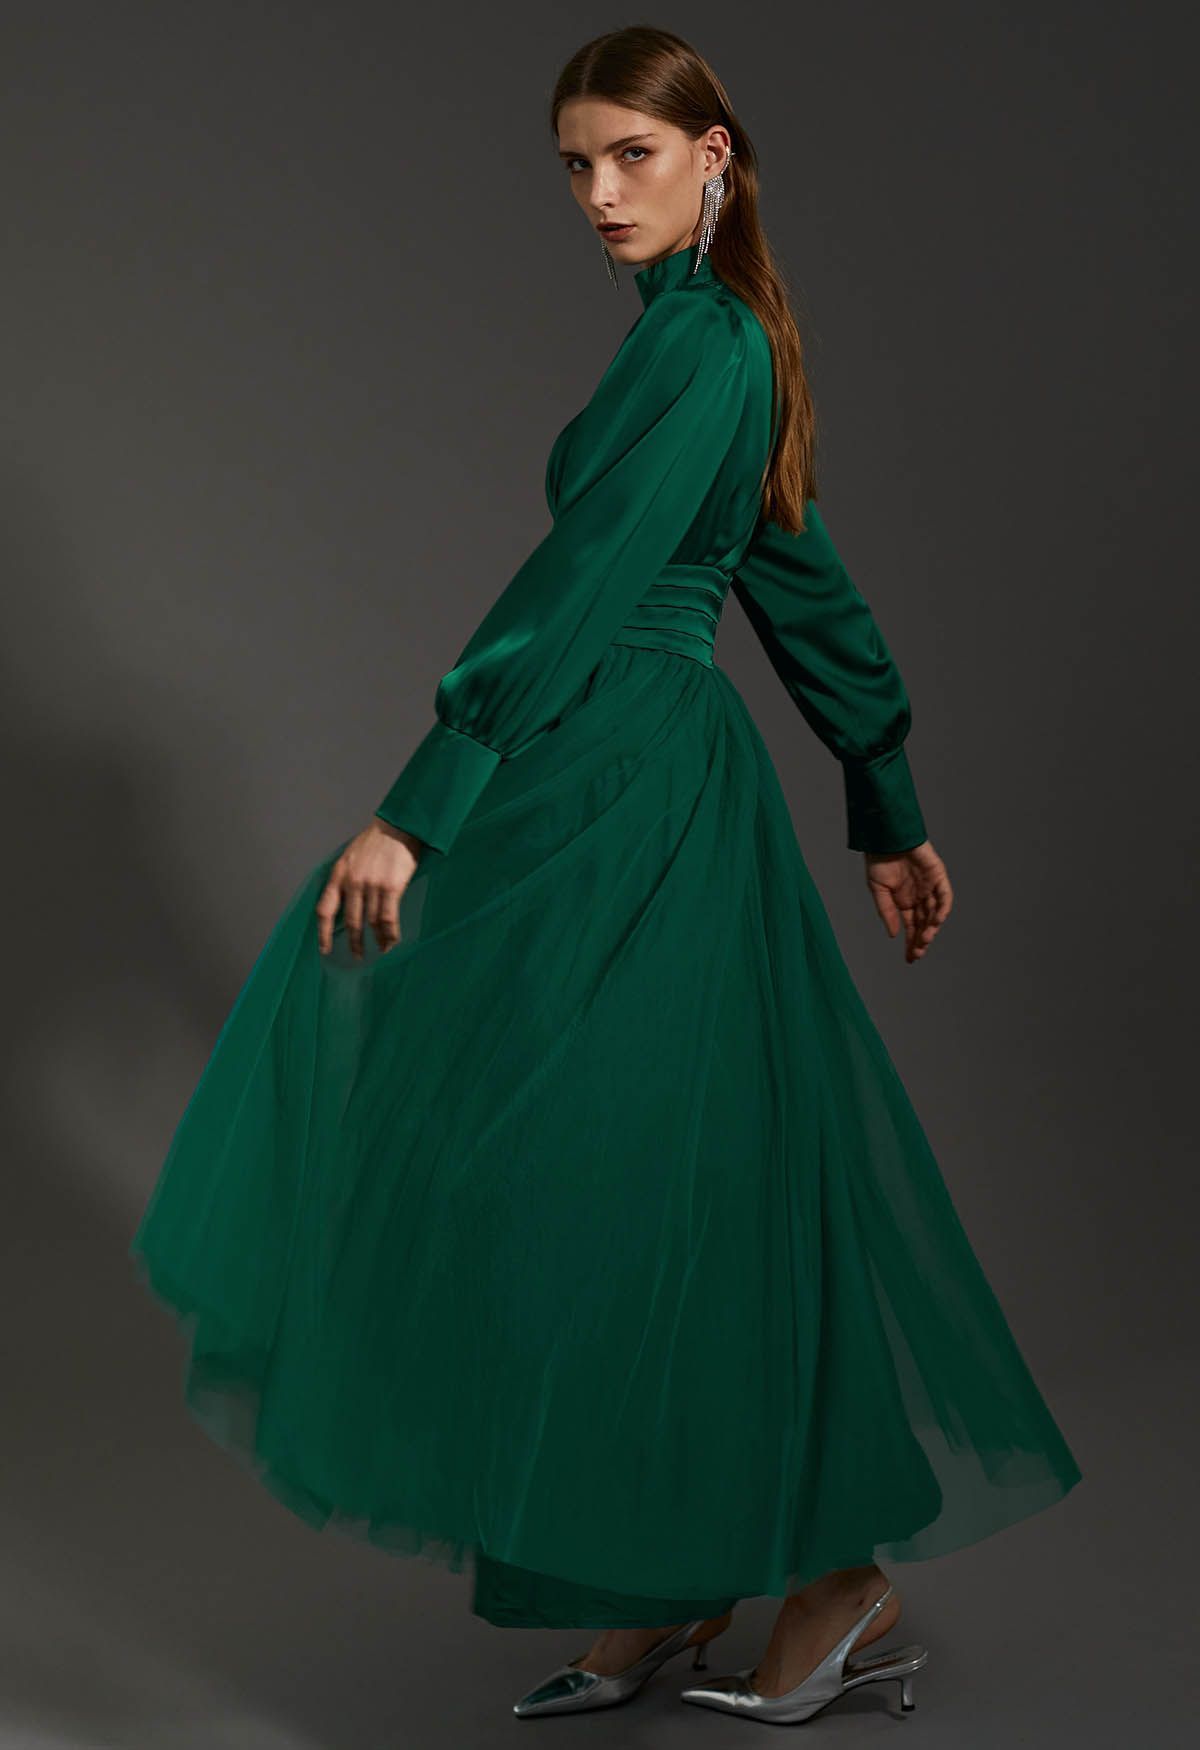 Shine Bright High Neck Tulle Maxi Dress in Emerald | Chicwish